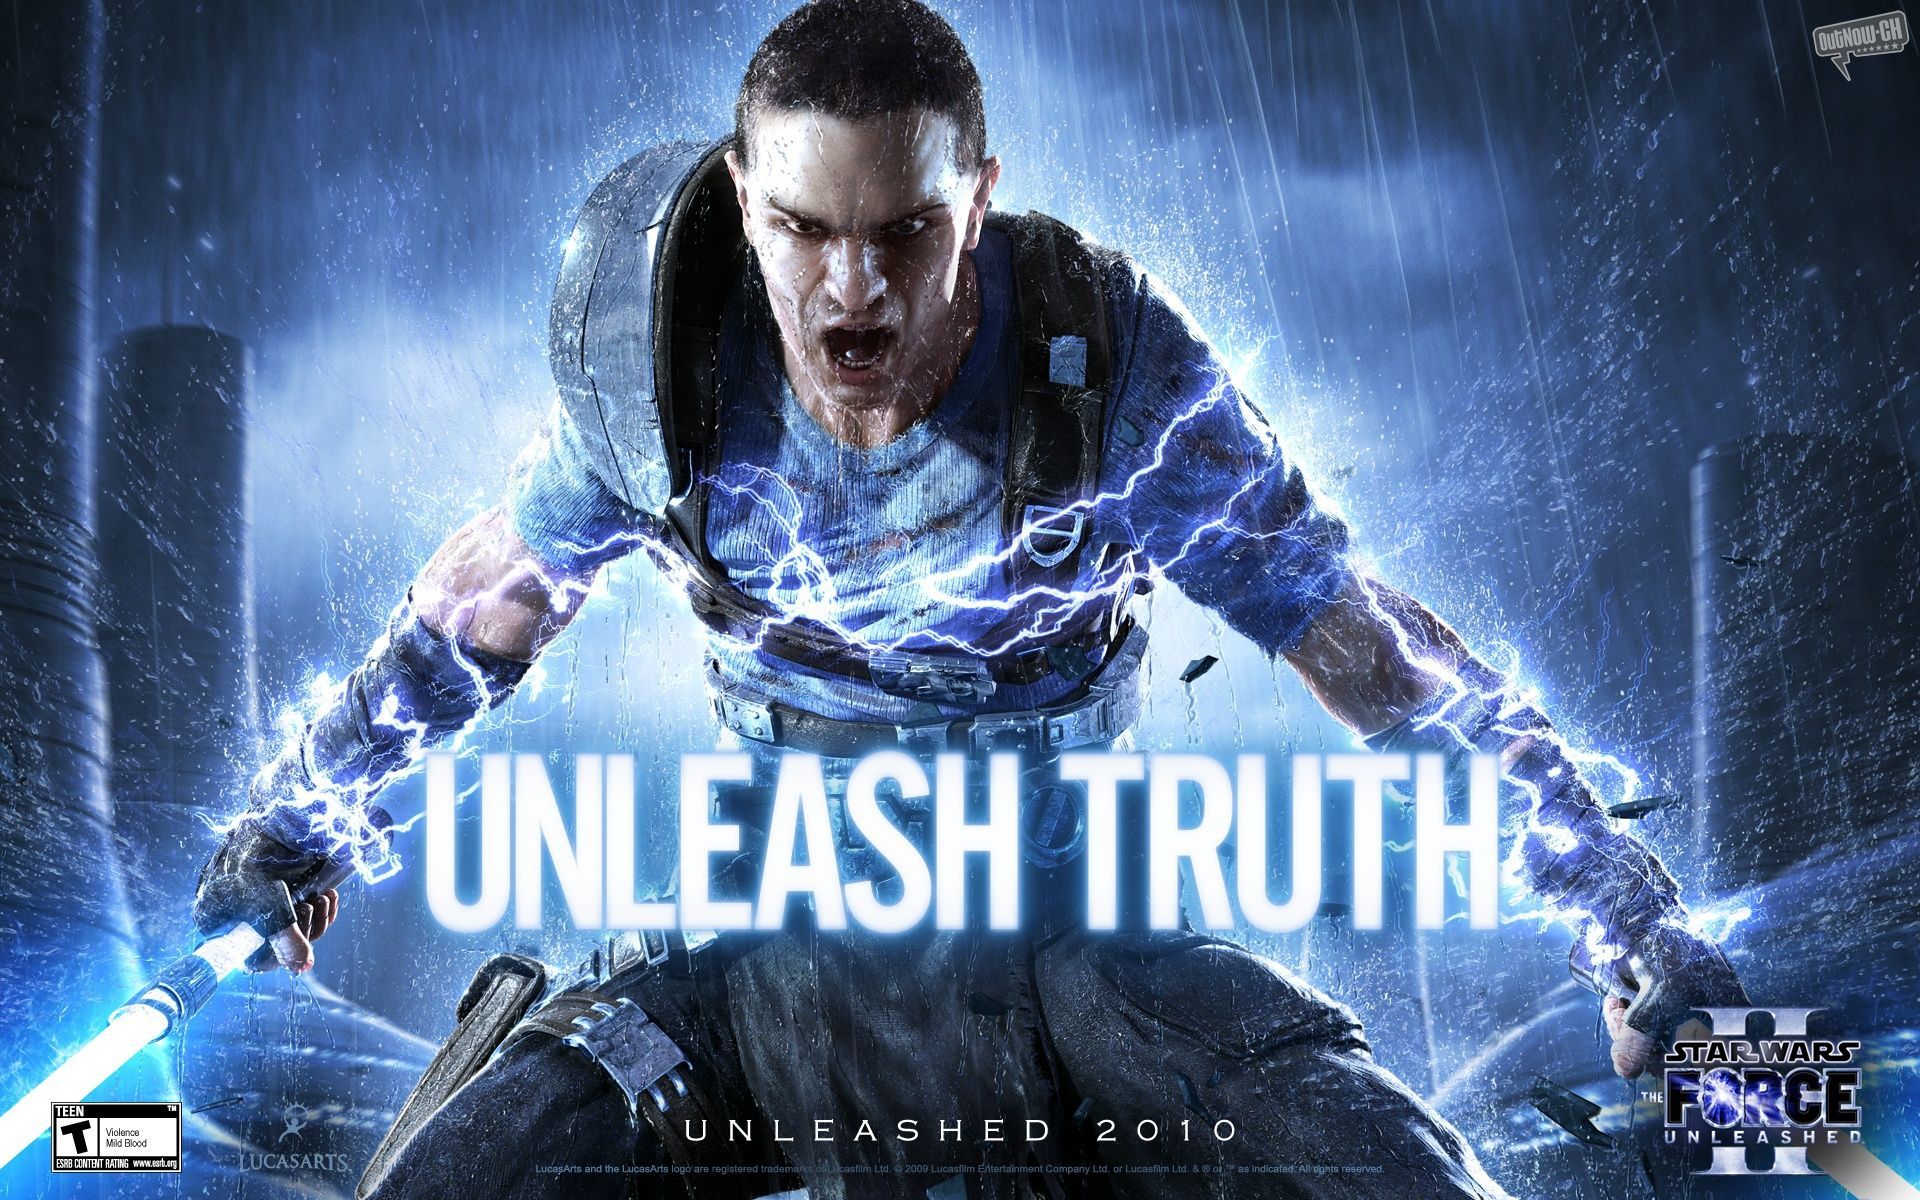 Force Unleashed 2 Wallpaper Group Wallpaper House.com